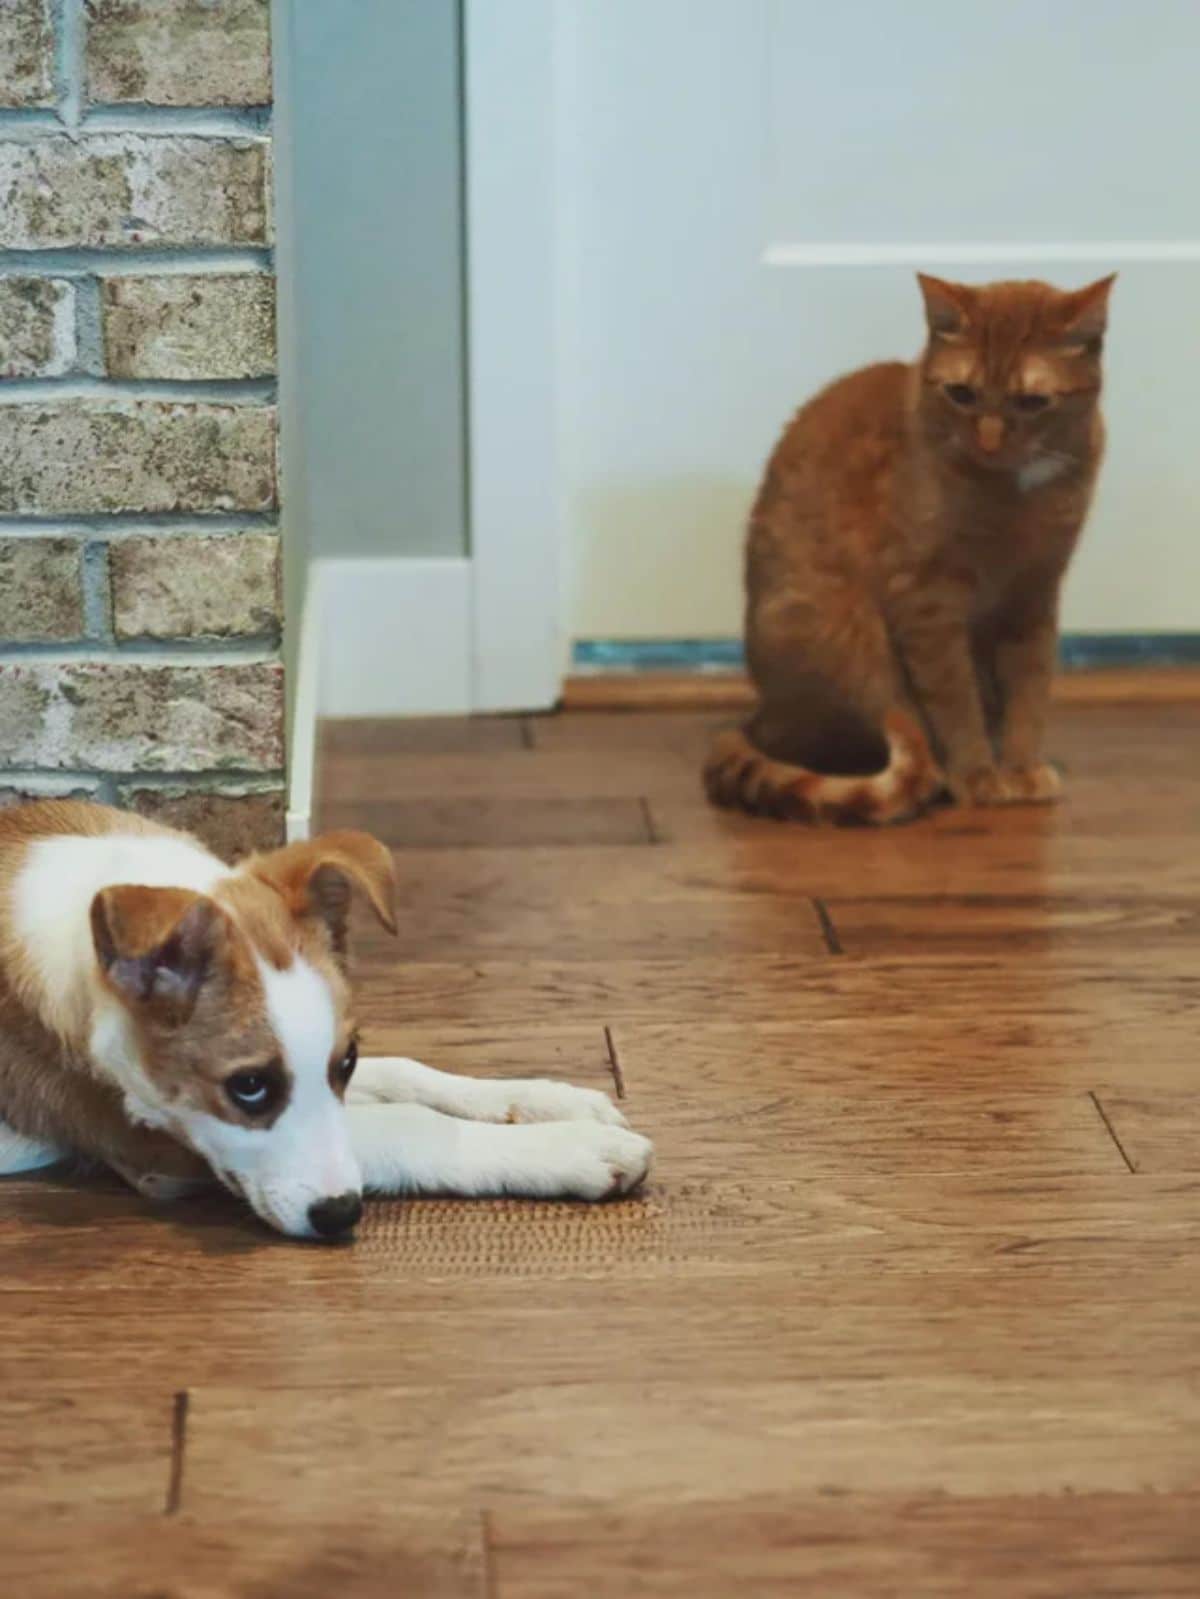 brown and white dog laying on the floor with an orange cat nearby